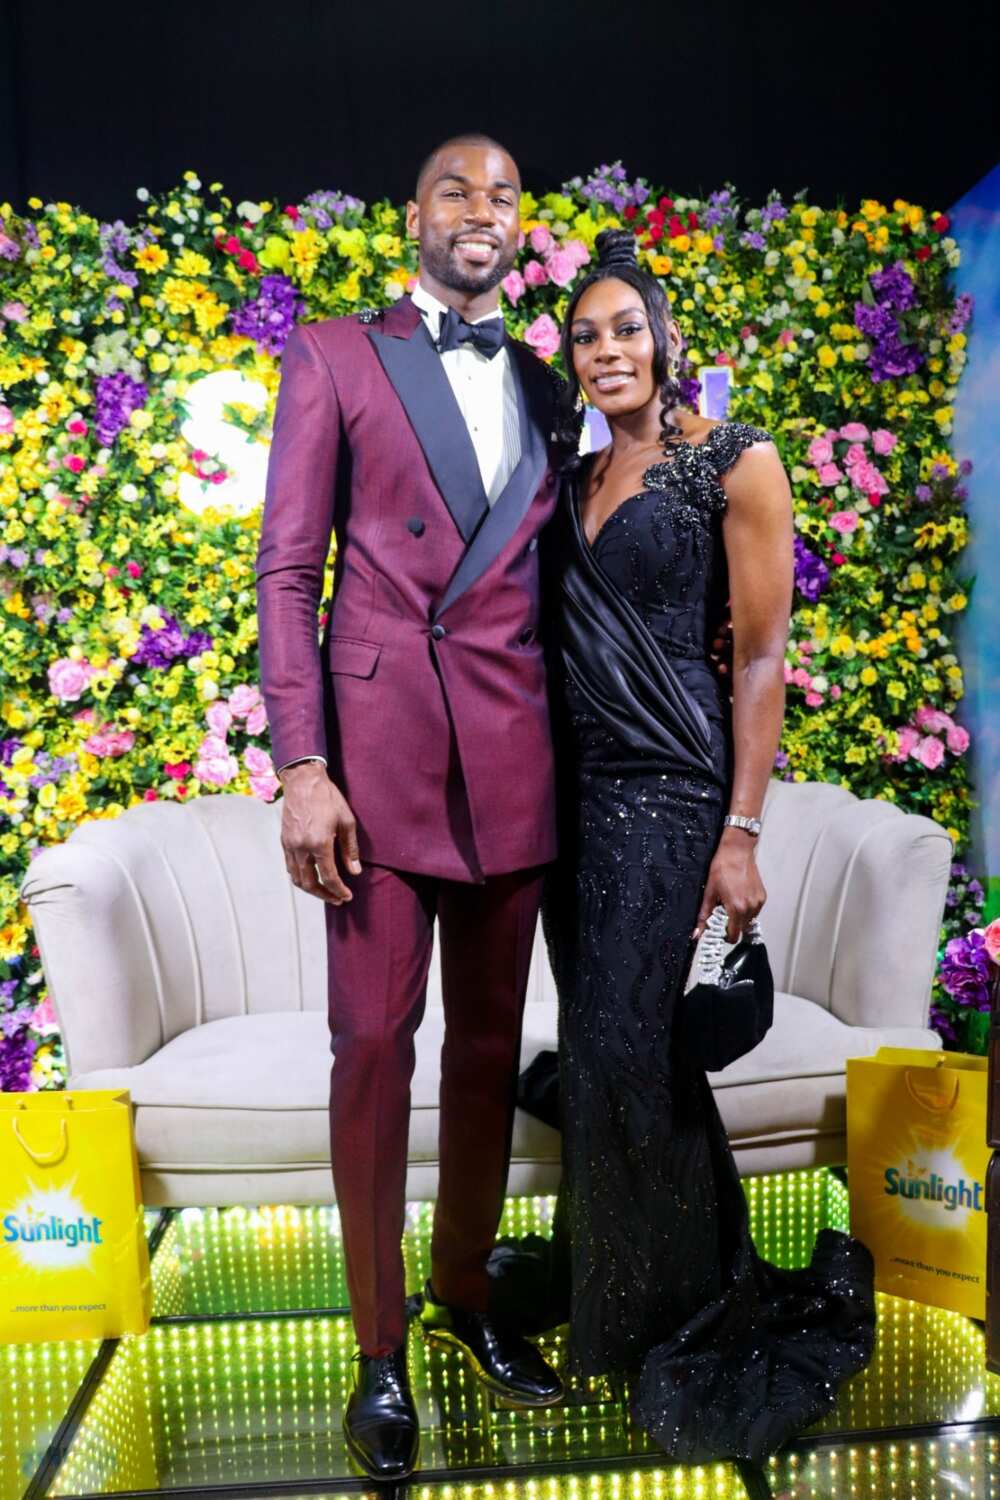 How Sunlight Wowed and Thrilled Guests at the 2022 AMVCA